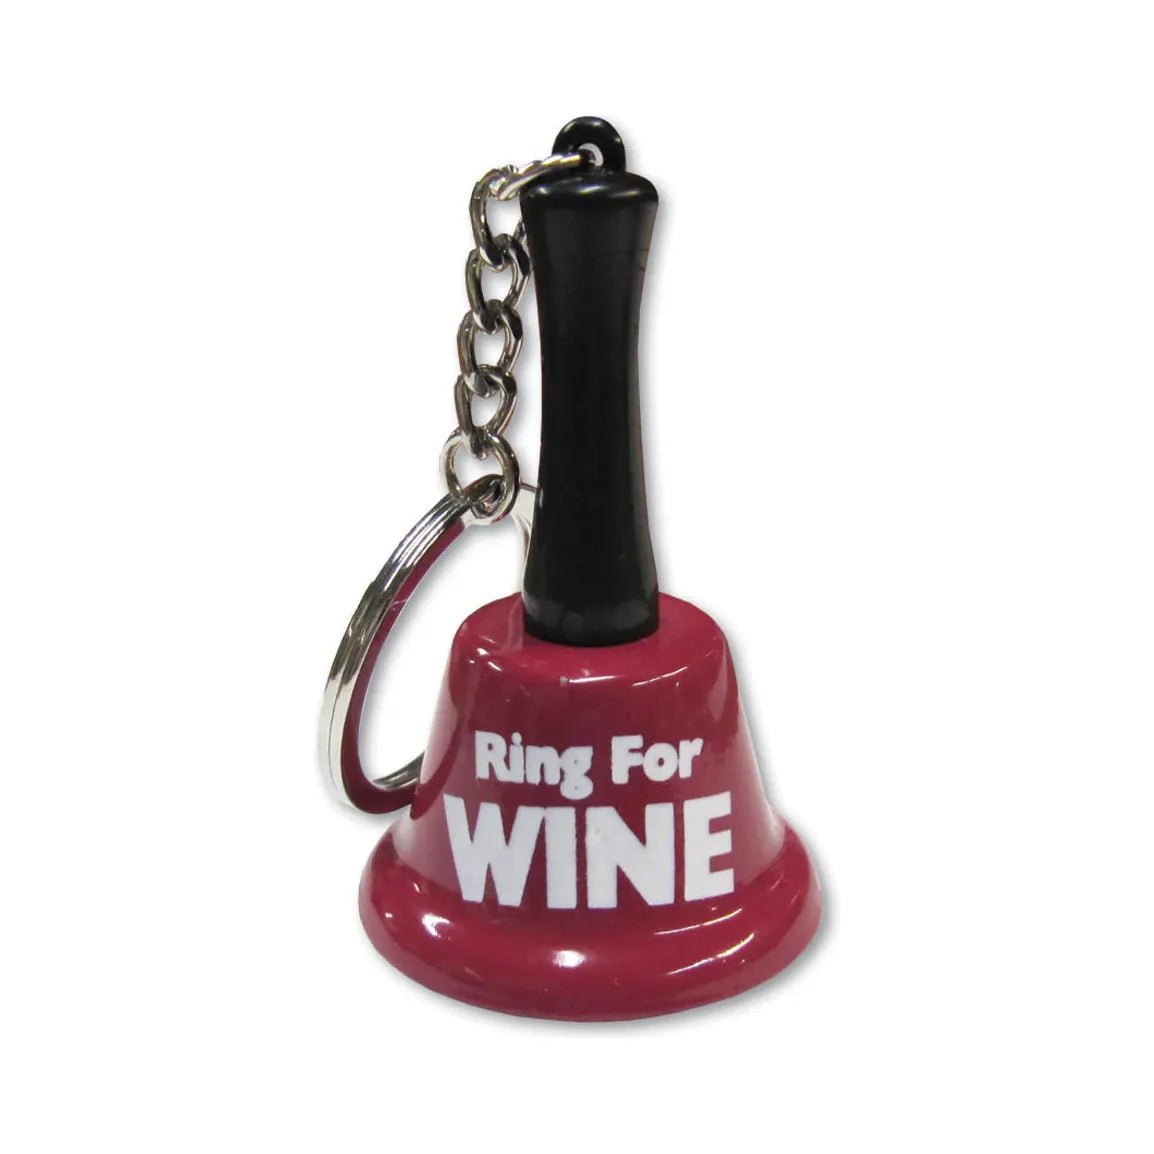 Ring for Wine Keychain by Ozze Creations